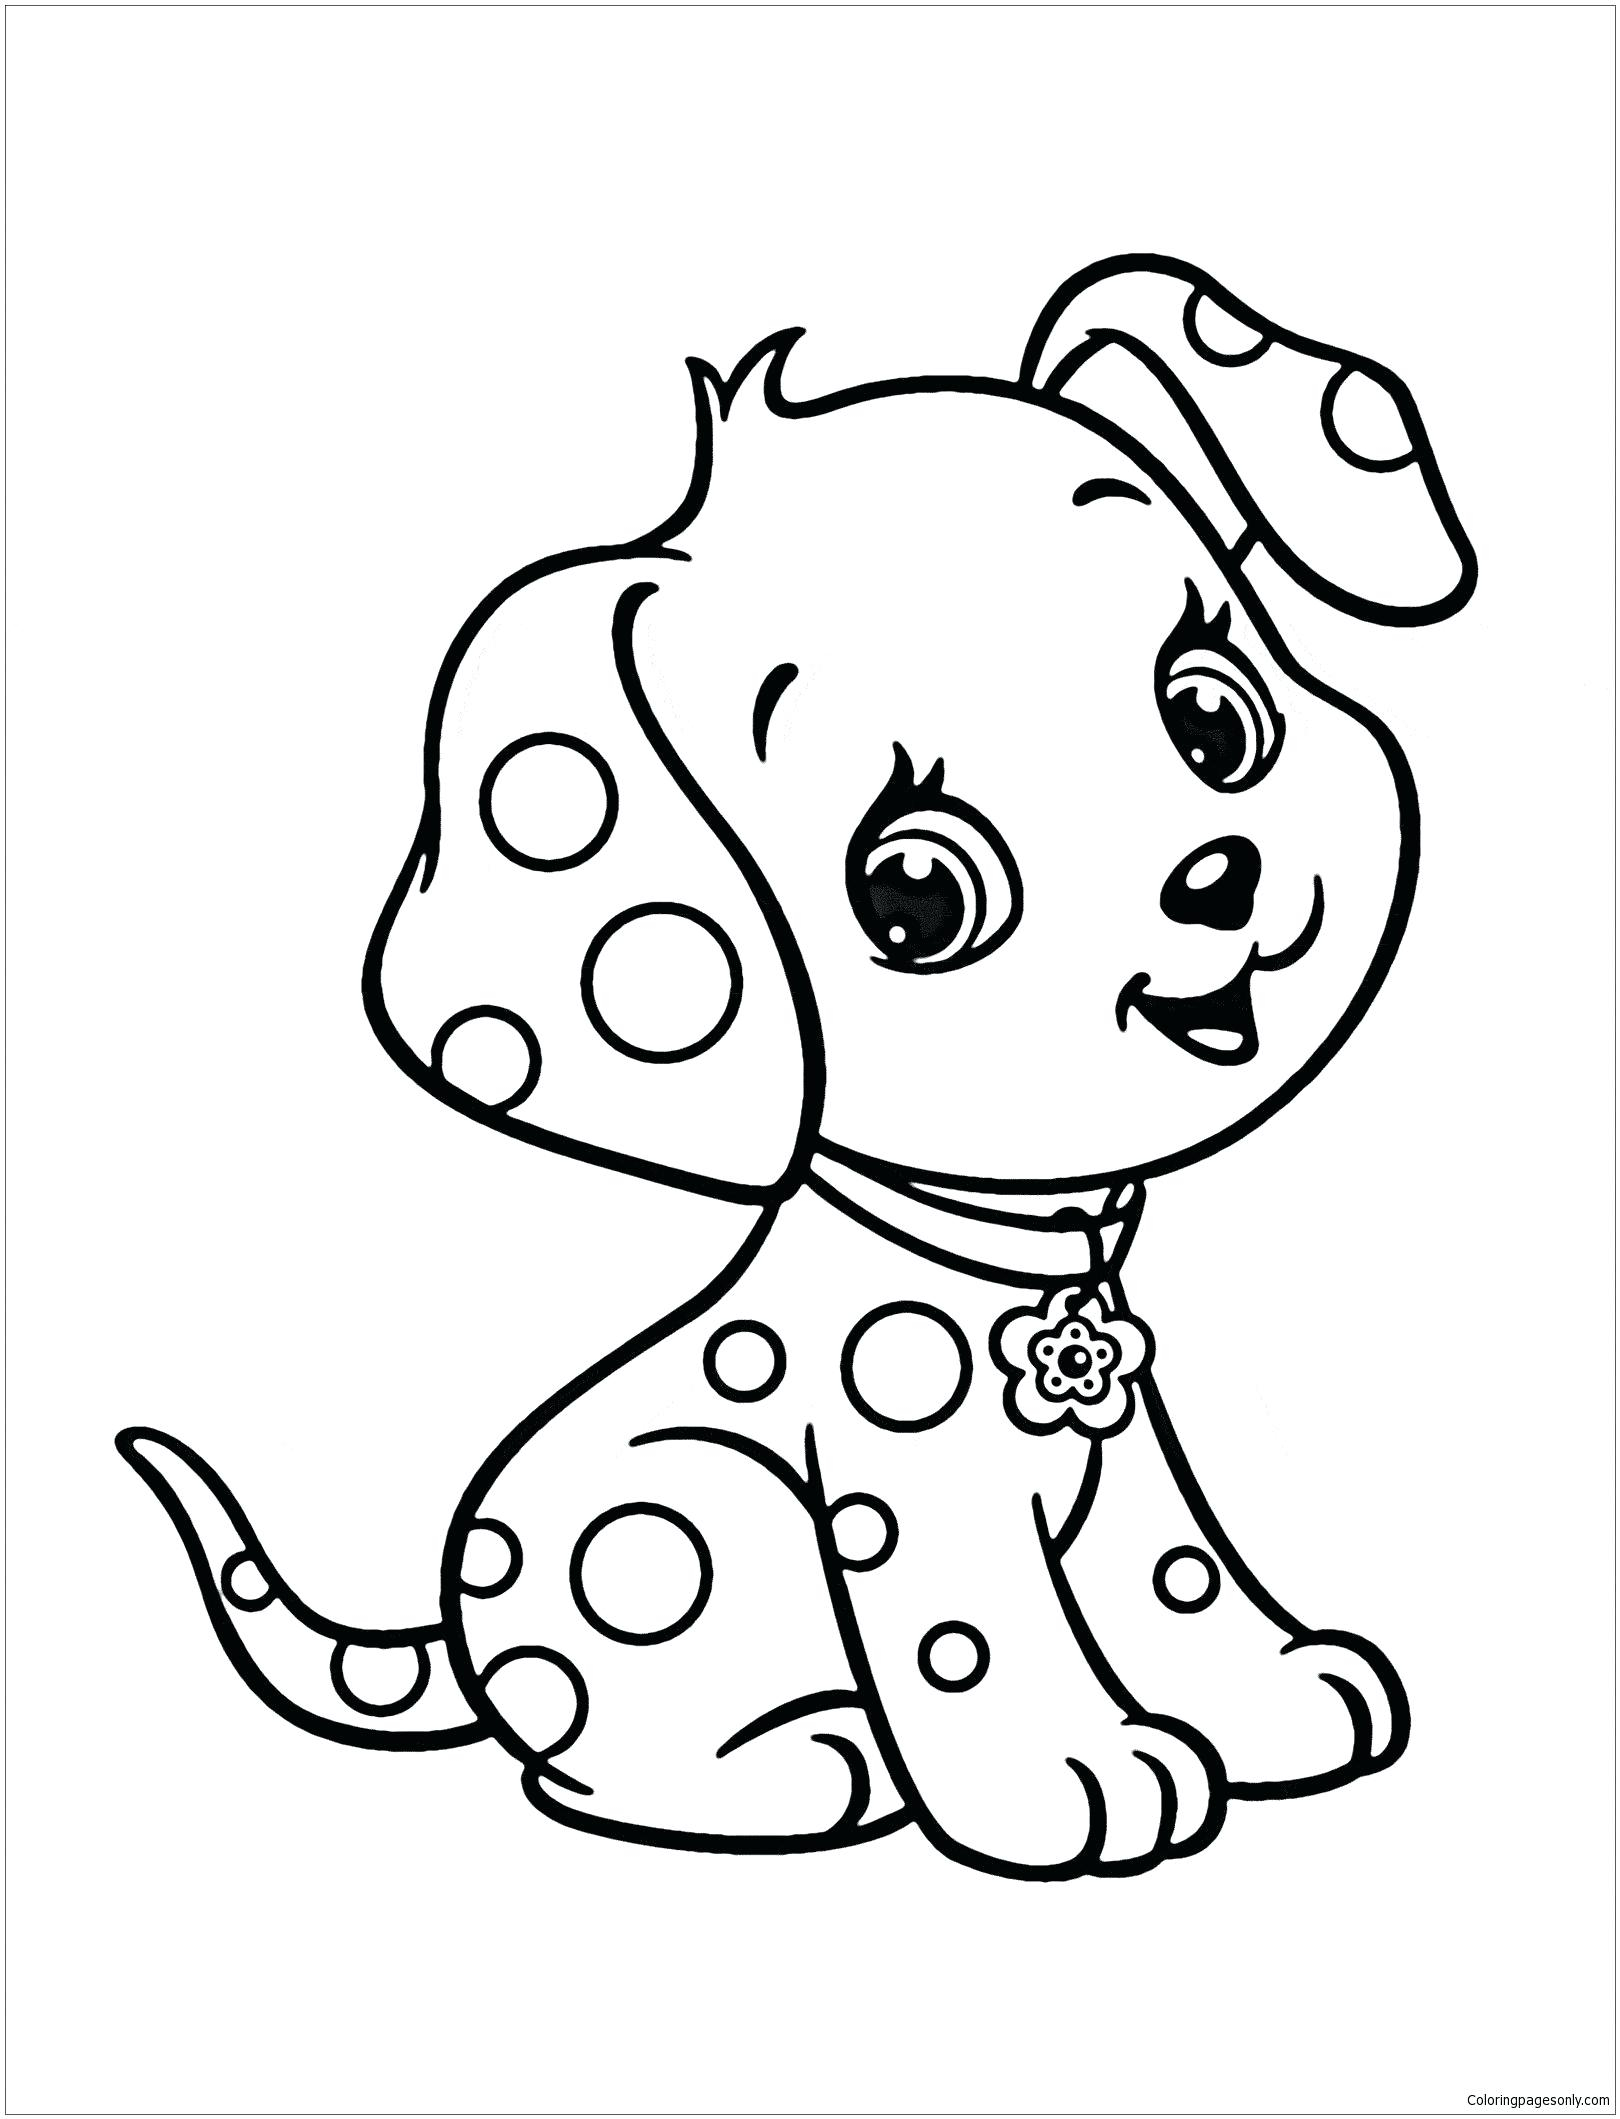 Dinner Plate Coloring Page Free Coloring Pages Cute Dogs Bluedotsheetco